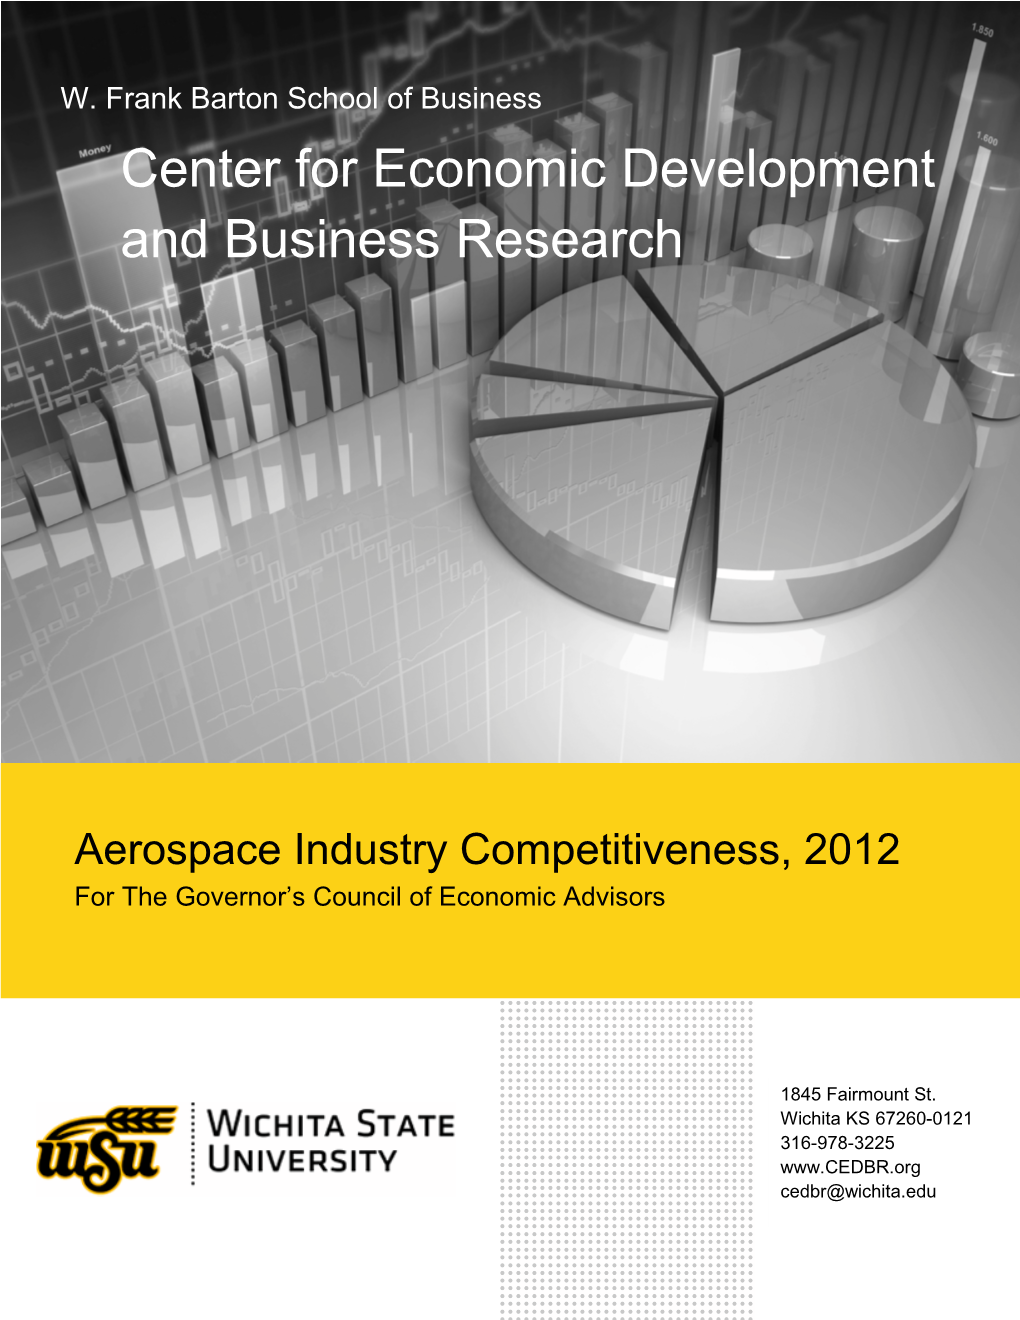 Access Aerospace Industry Competitiveness, 2012